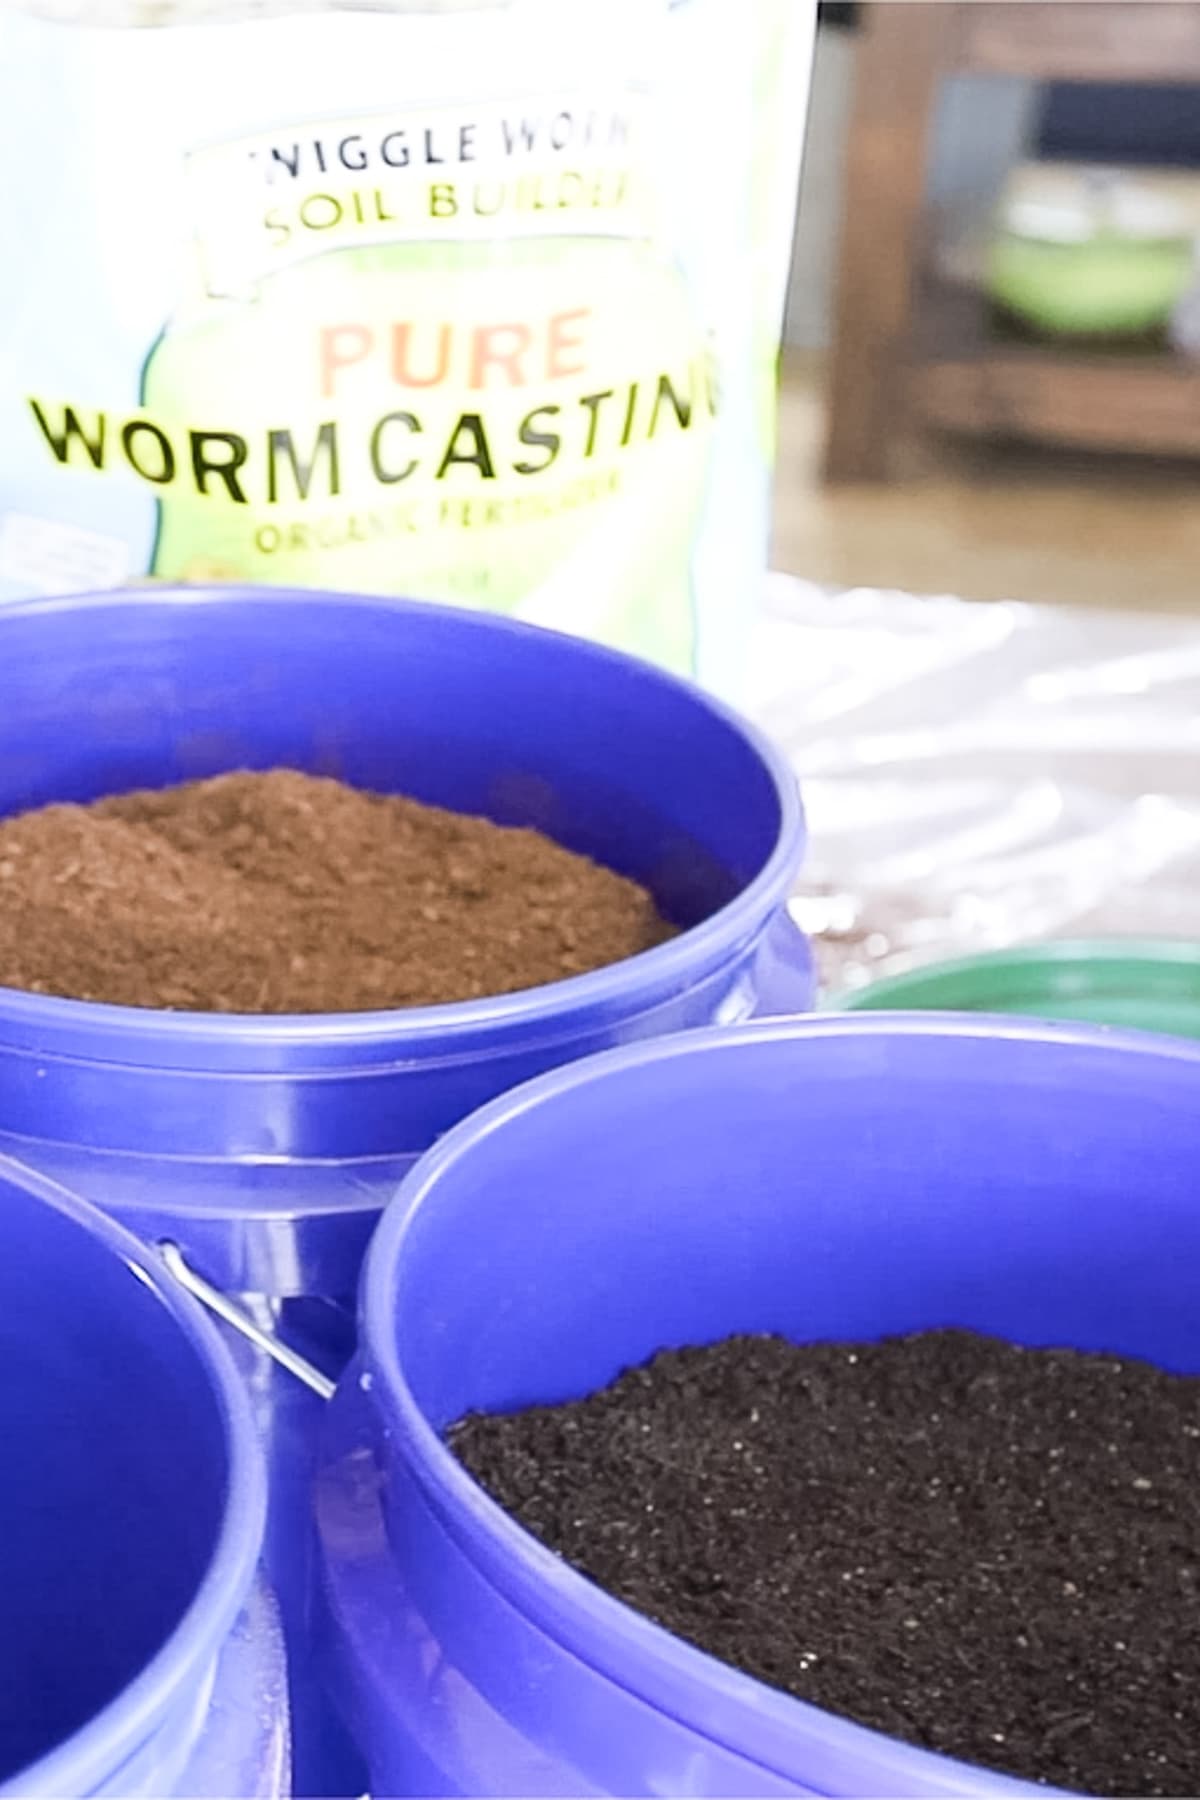 sifted peat moss and compost for soil blocks